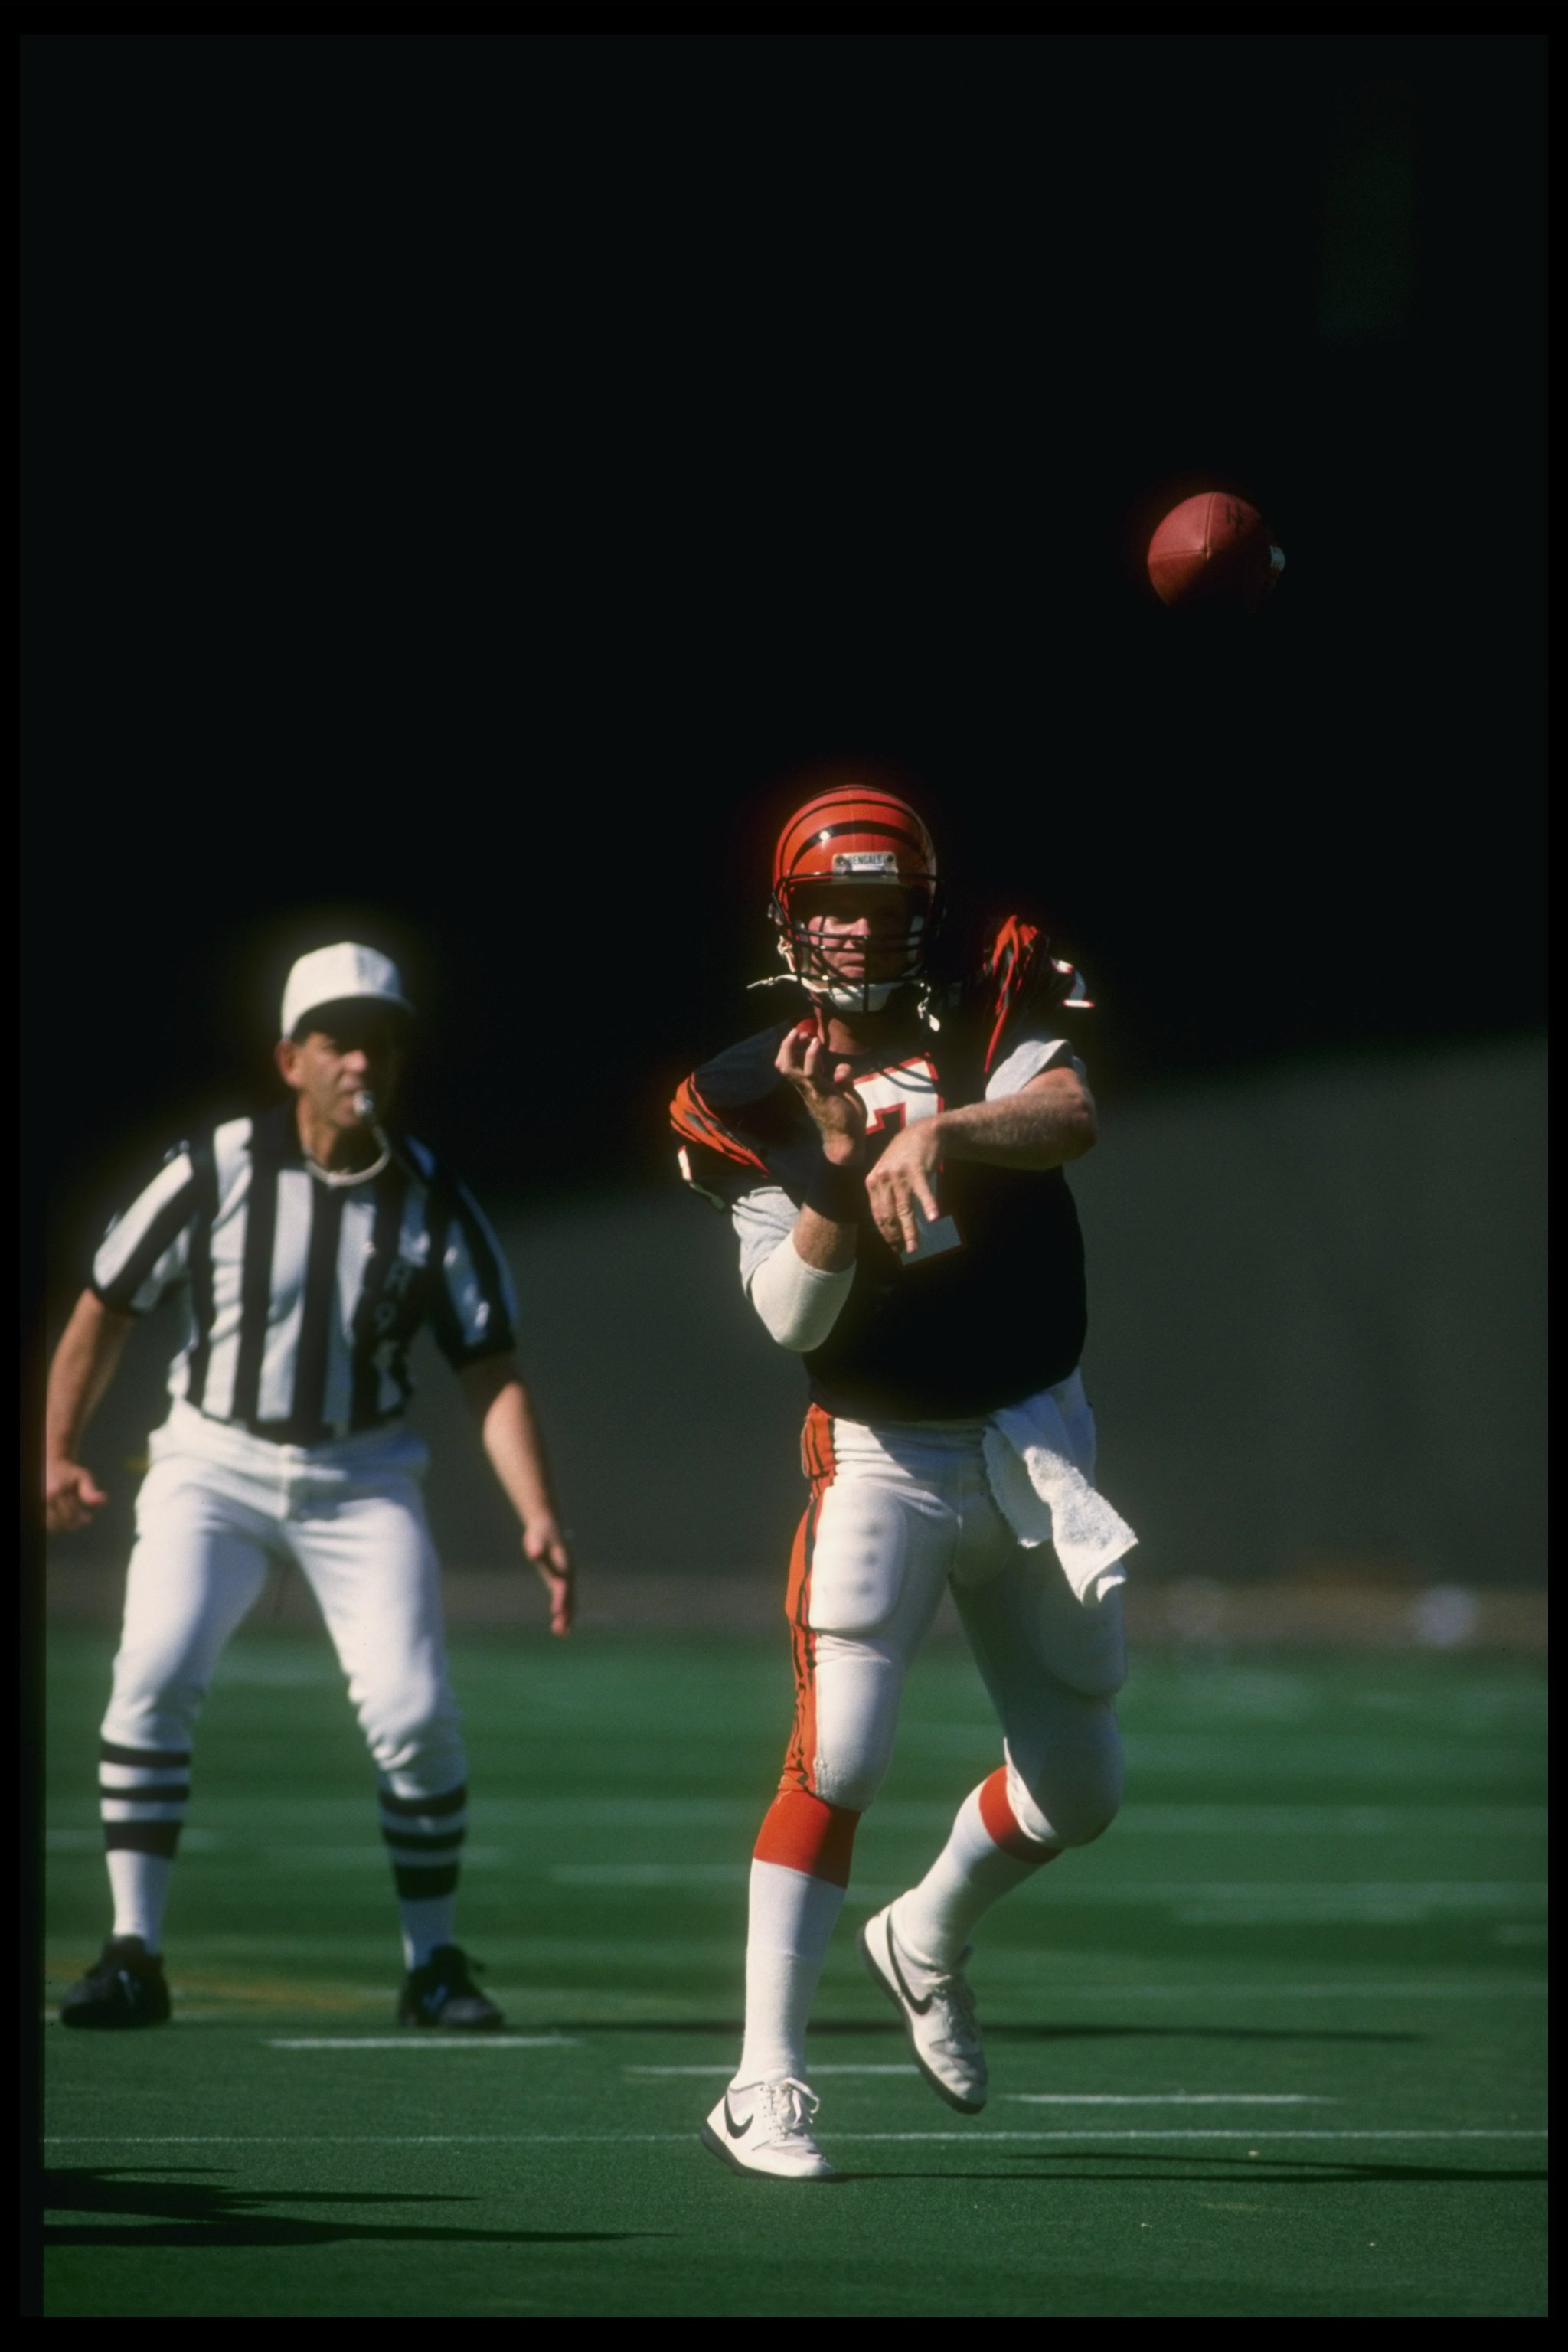 25 Sep 1988: Quarterback Boomer Esiason of the Cincinnati Bengals throws the ball during a game against the Cleveland Browns at Riverfront Stadium in Cincinnati, Ohio. The Bengals won the game, 24-17.